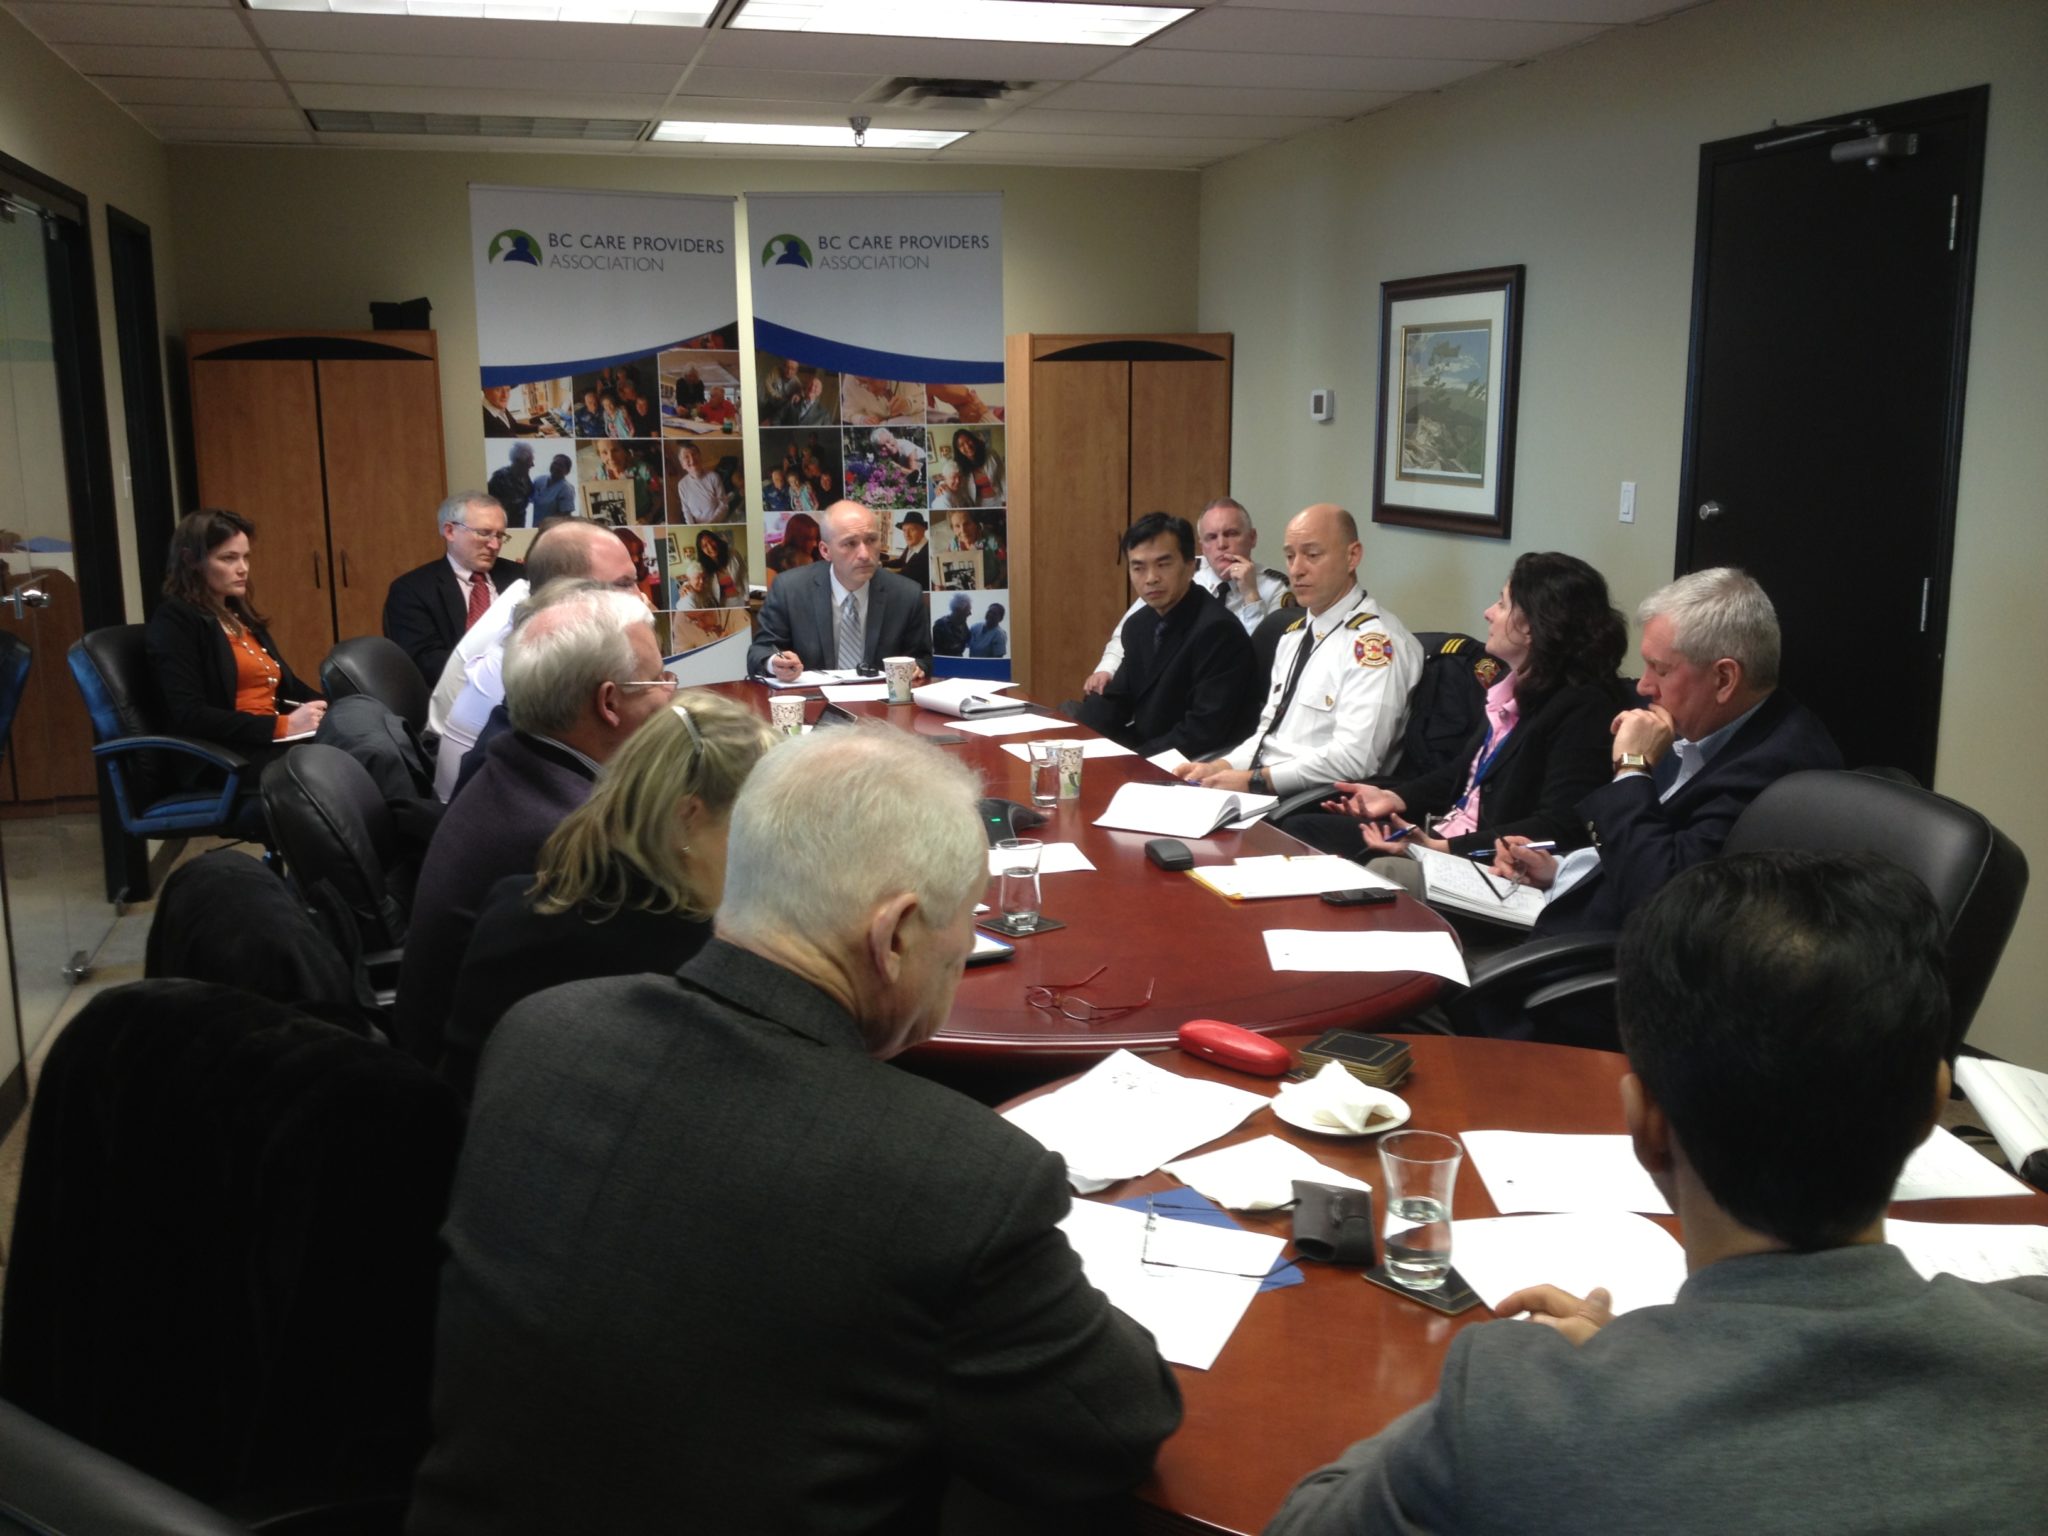 Over 20 stakeholders gathered at BCCPA office to discuss fire sprinkler safety in BC care homes